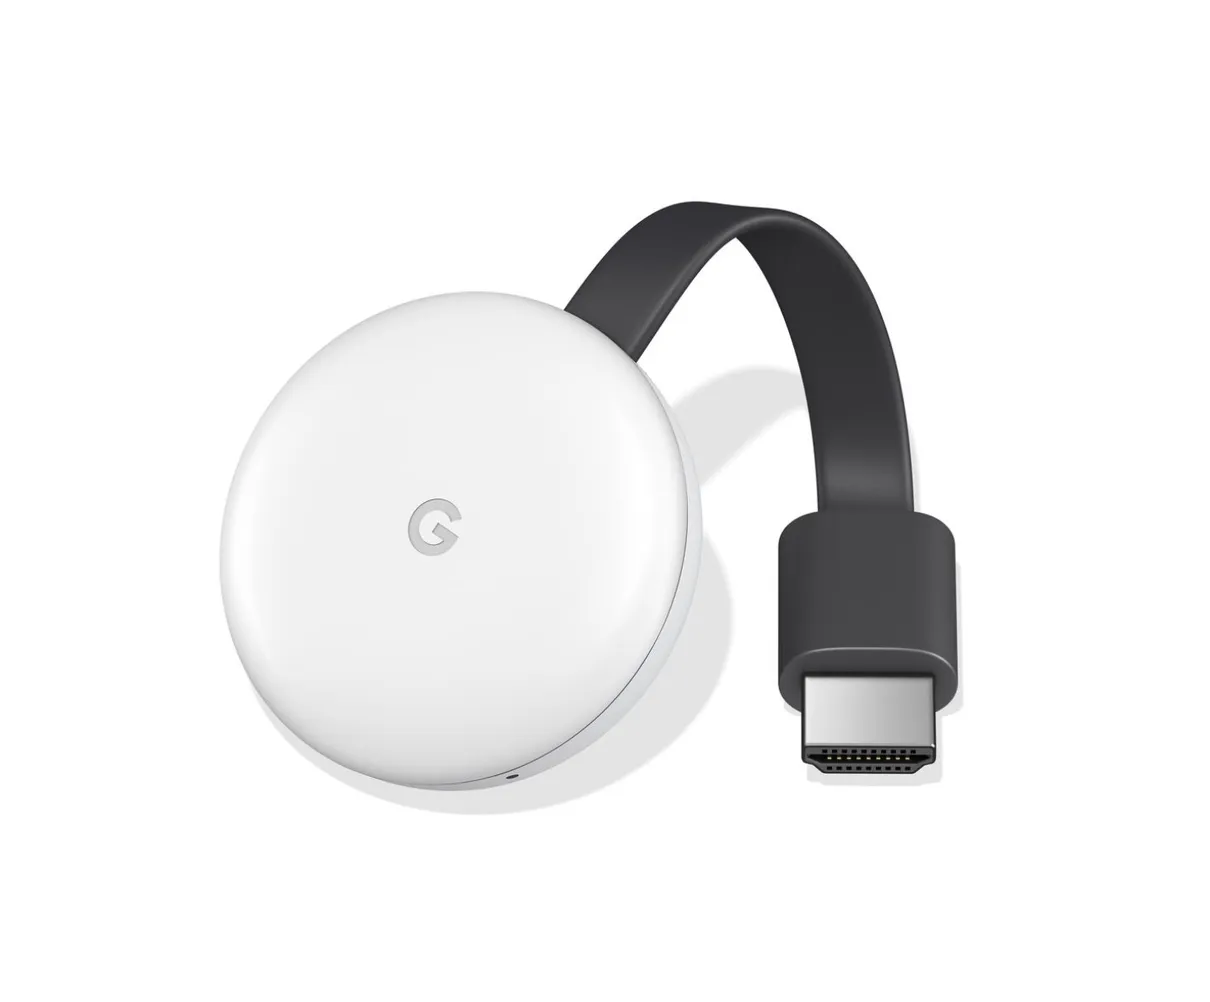 A white, circular device with the Google G logo in the center and a black, flat HDMI cord attached